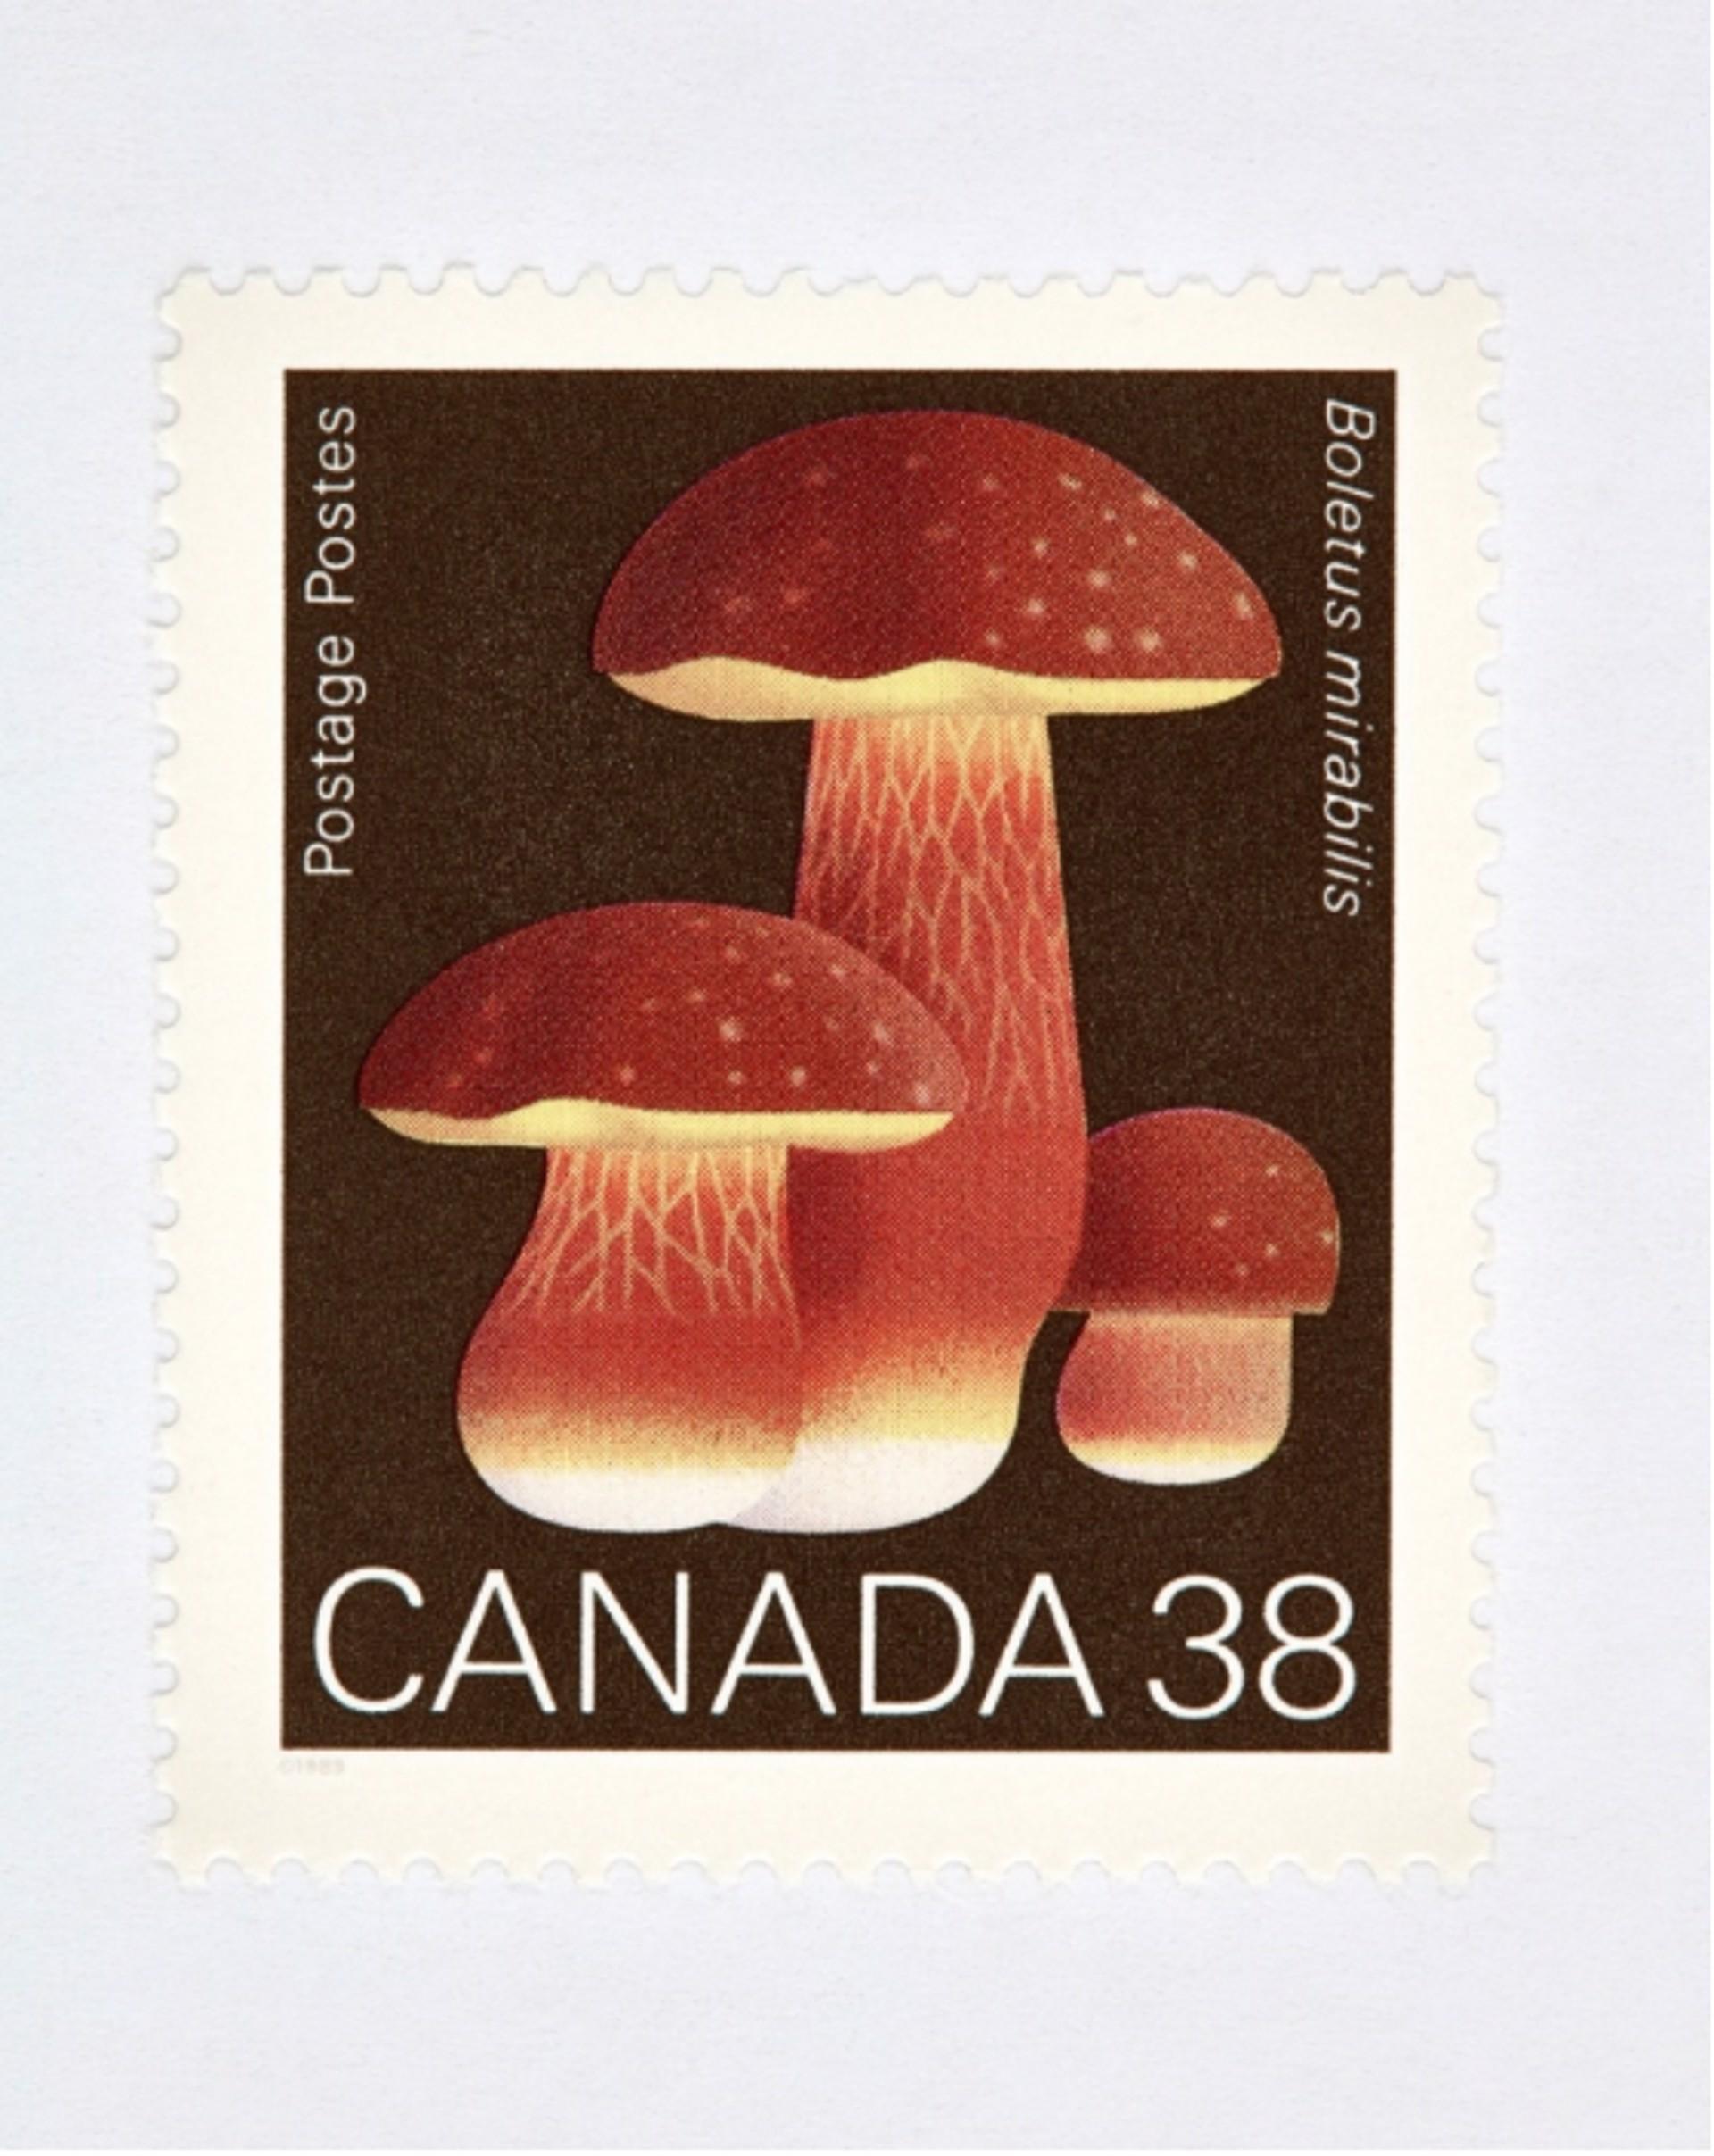 Canada 38 Mushroom (Brown)
Digital C-Print / Archival Pigment Print
Edition of 20 per size
Available sizes:
36 x 27

“Collectible” series is a macro level exploration of coins, bills and stamps. These images are created with the intention of being